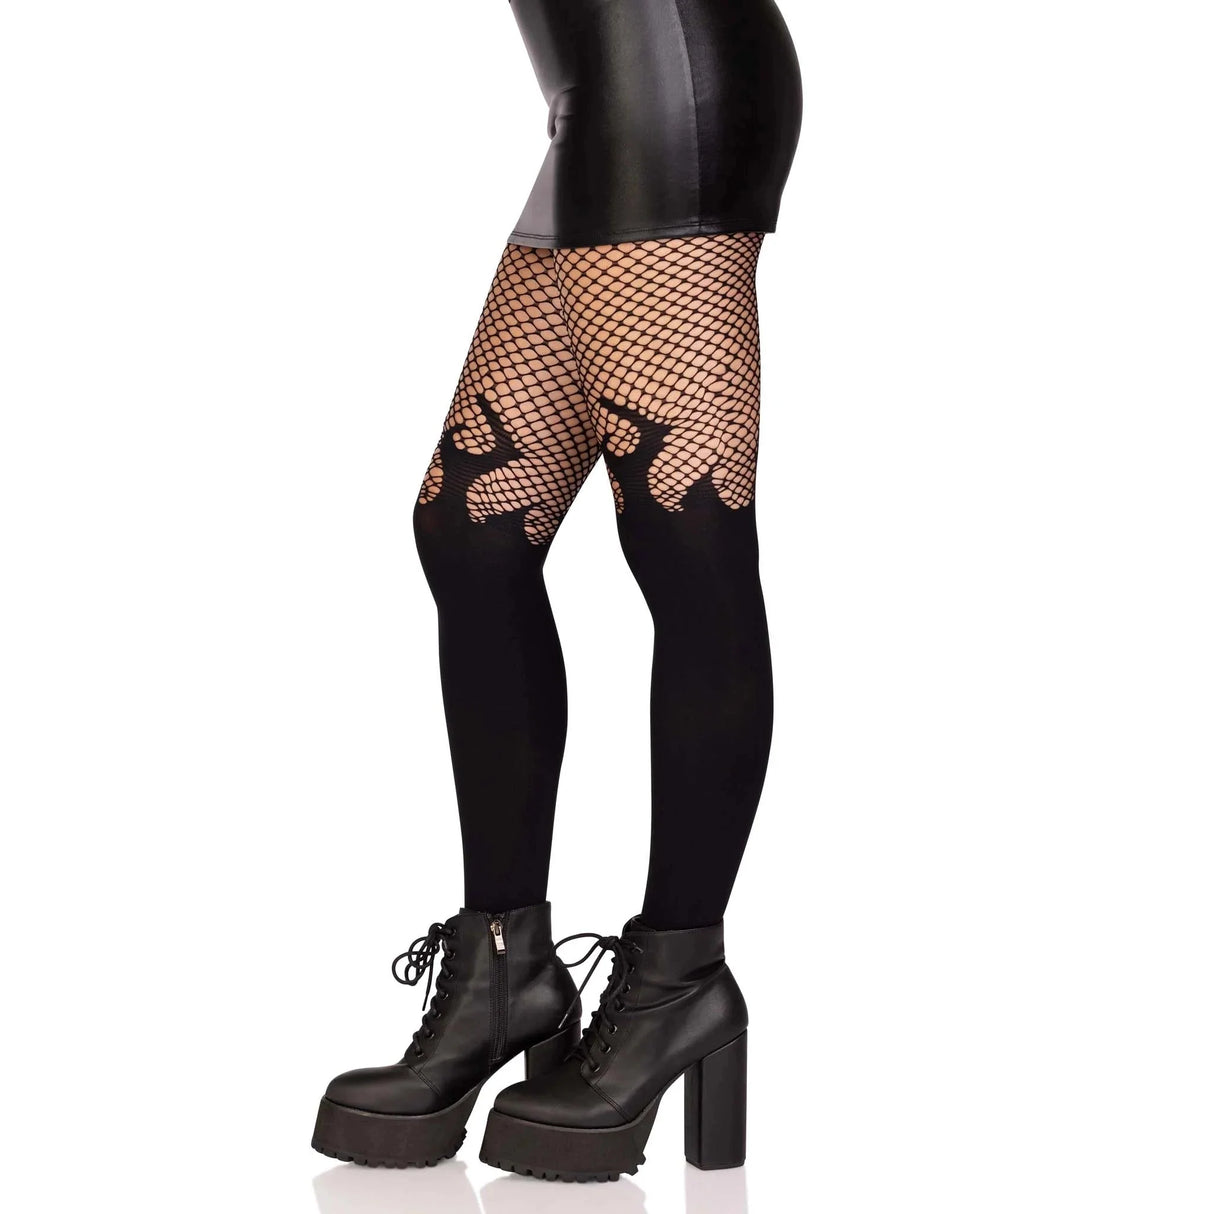 Opaque Flame Tights With Fishnet Top